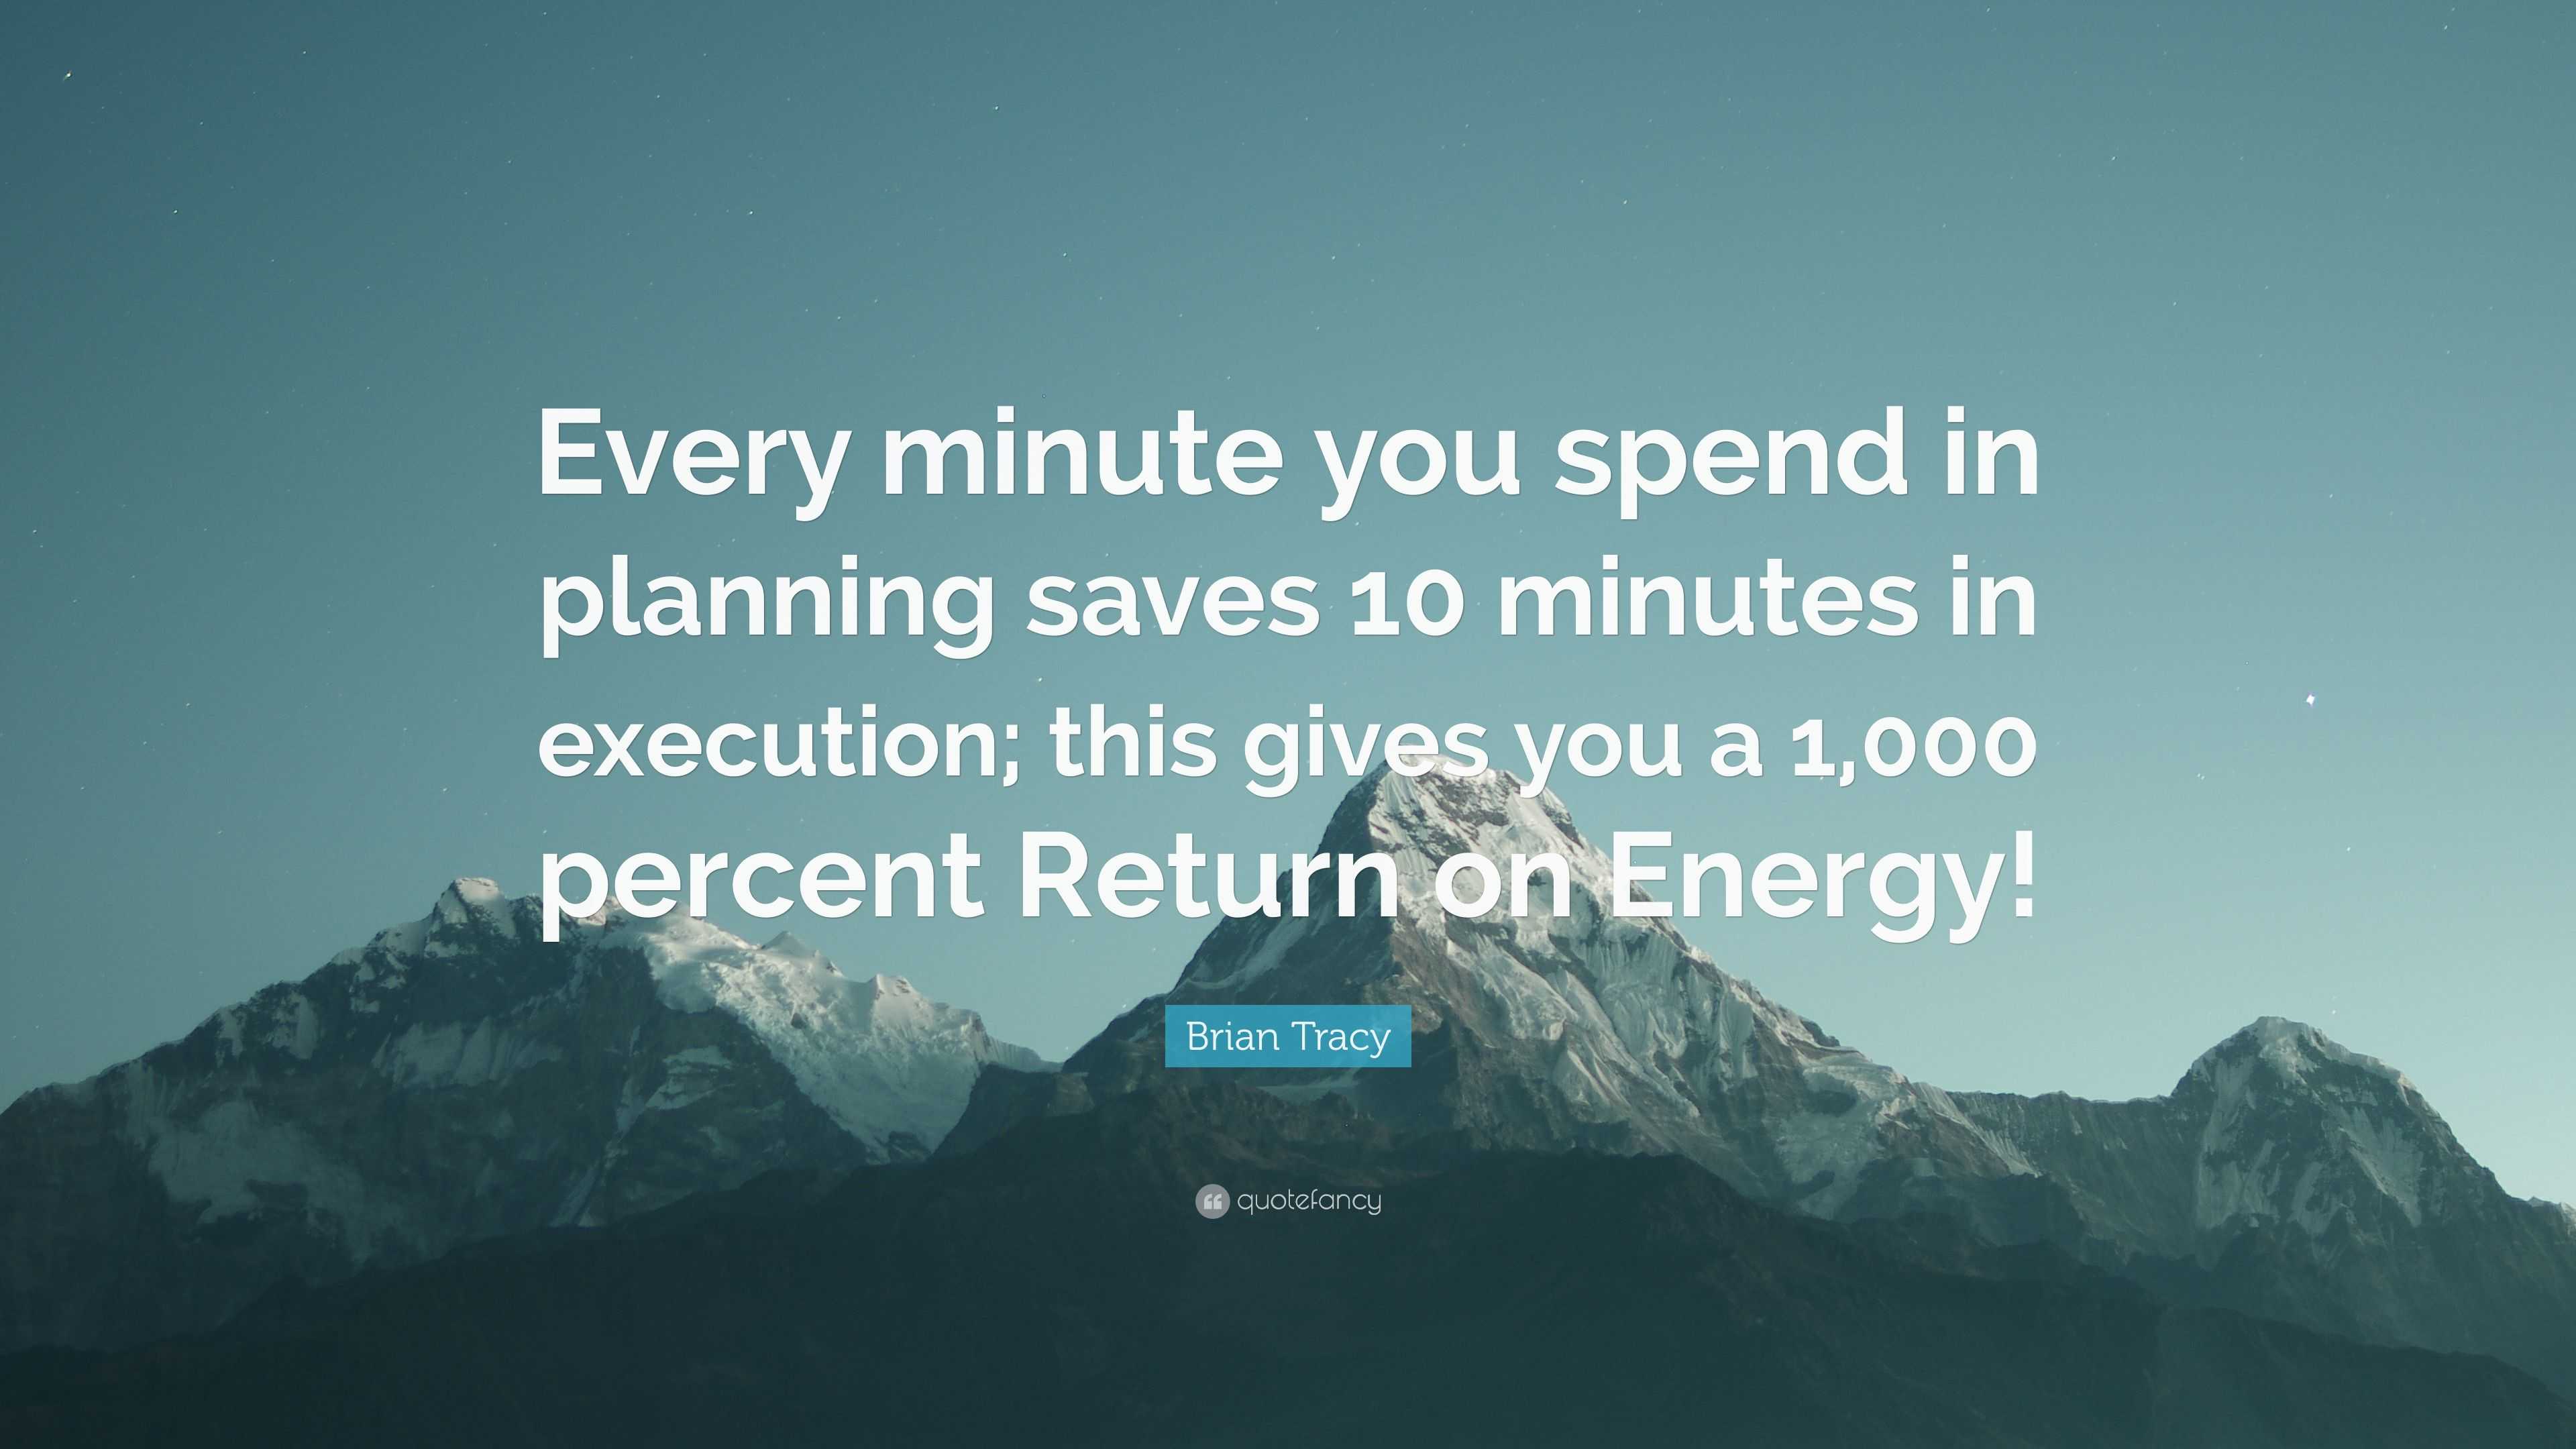 Brian Tracy Quote: “Every minute you spend in planning saves 10 minutes